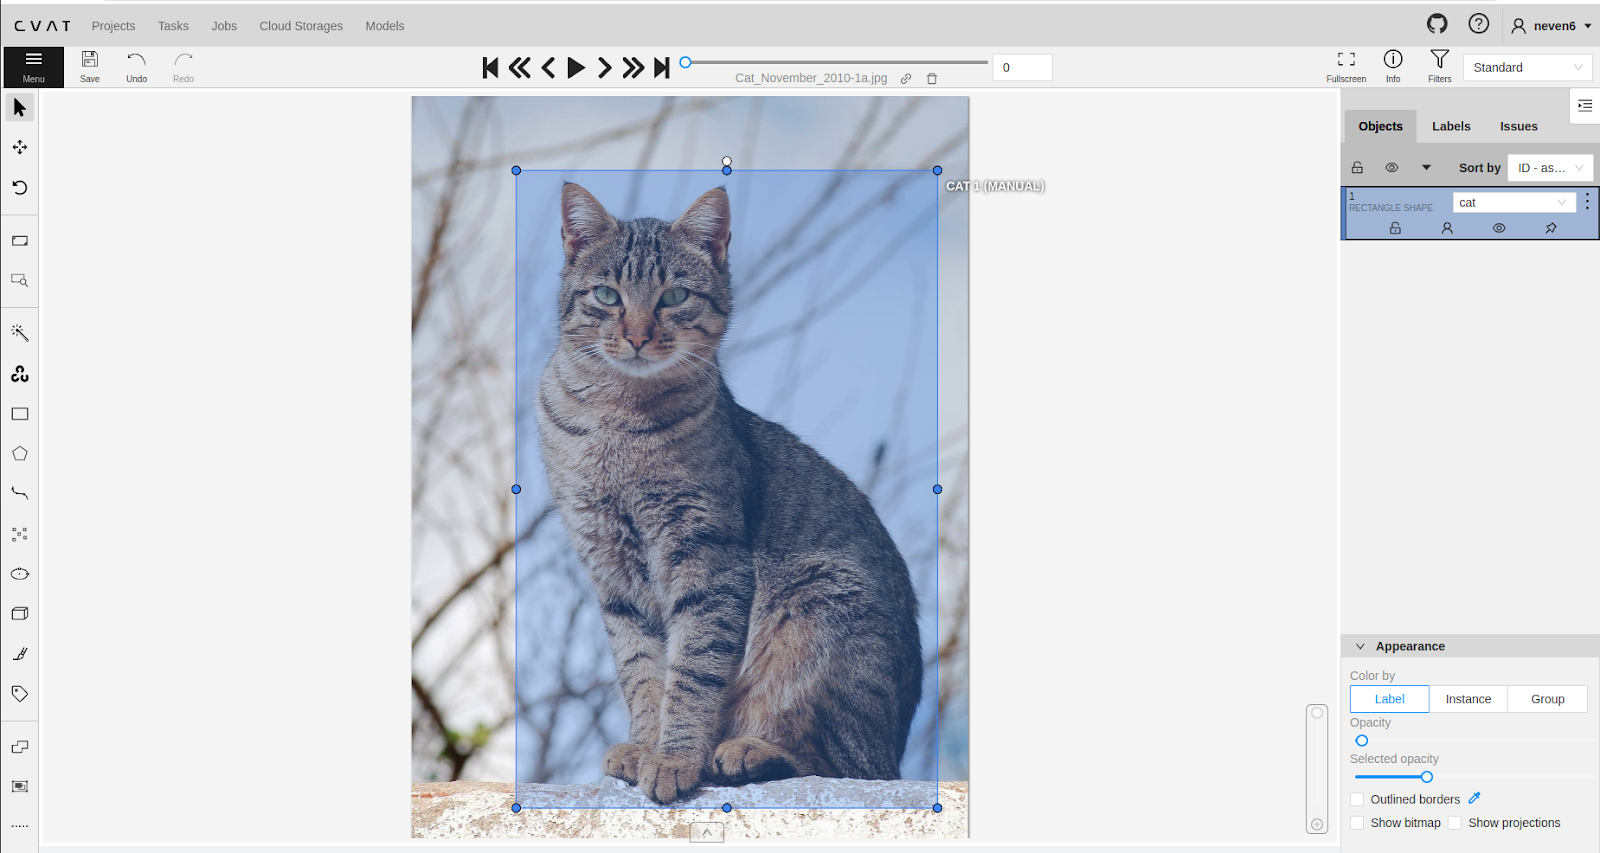 CVAT being used for manual annotation of an image of a cat.